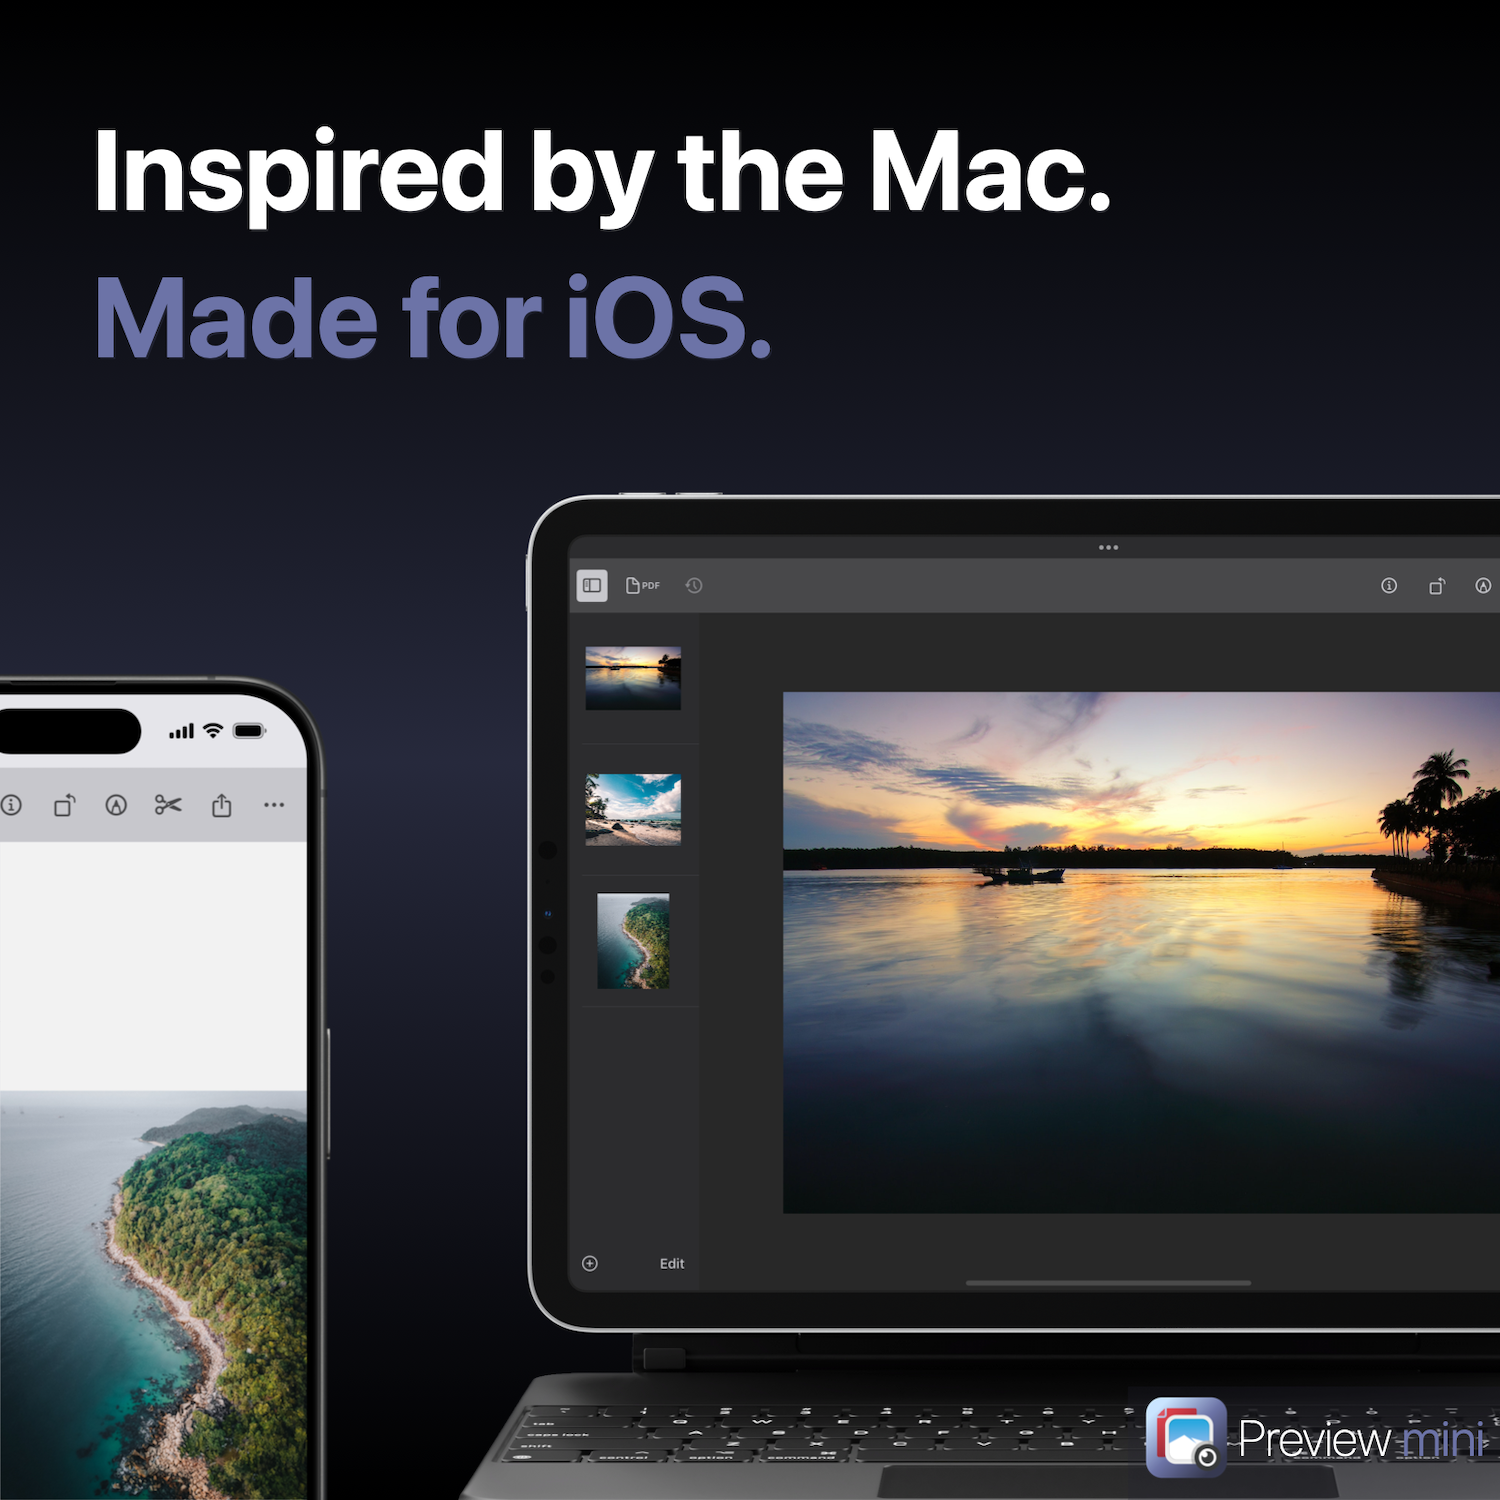 Preview mini – Inspired by macOS Preview. Made for iPhone and iPad.